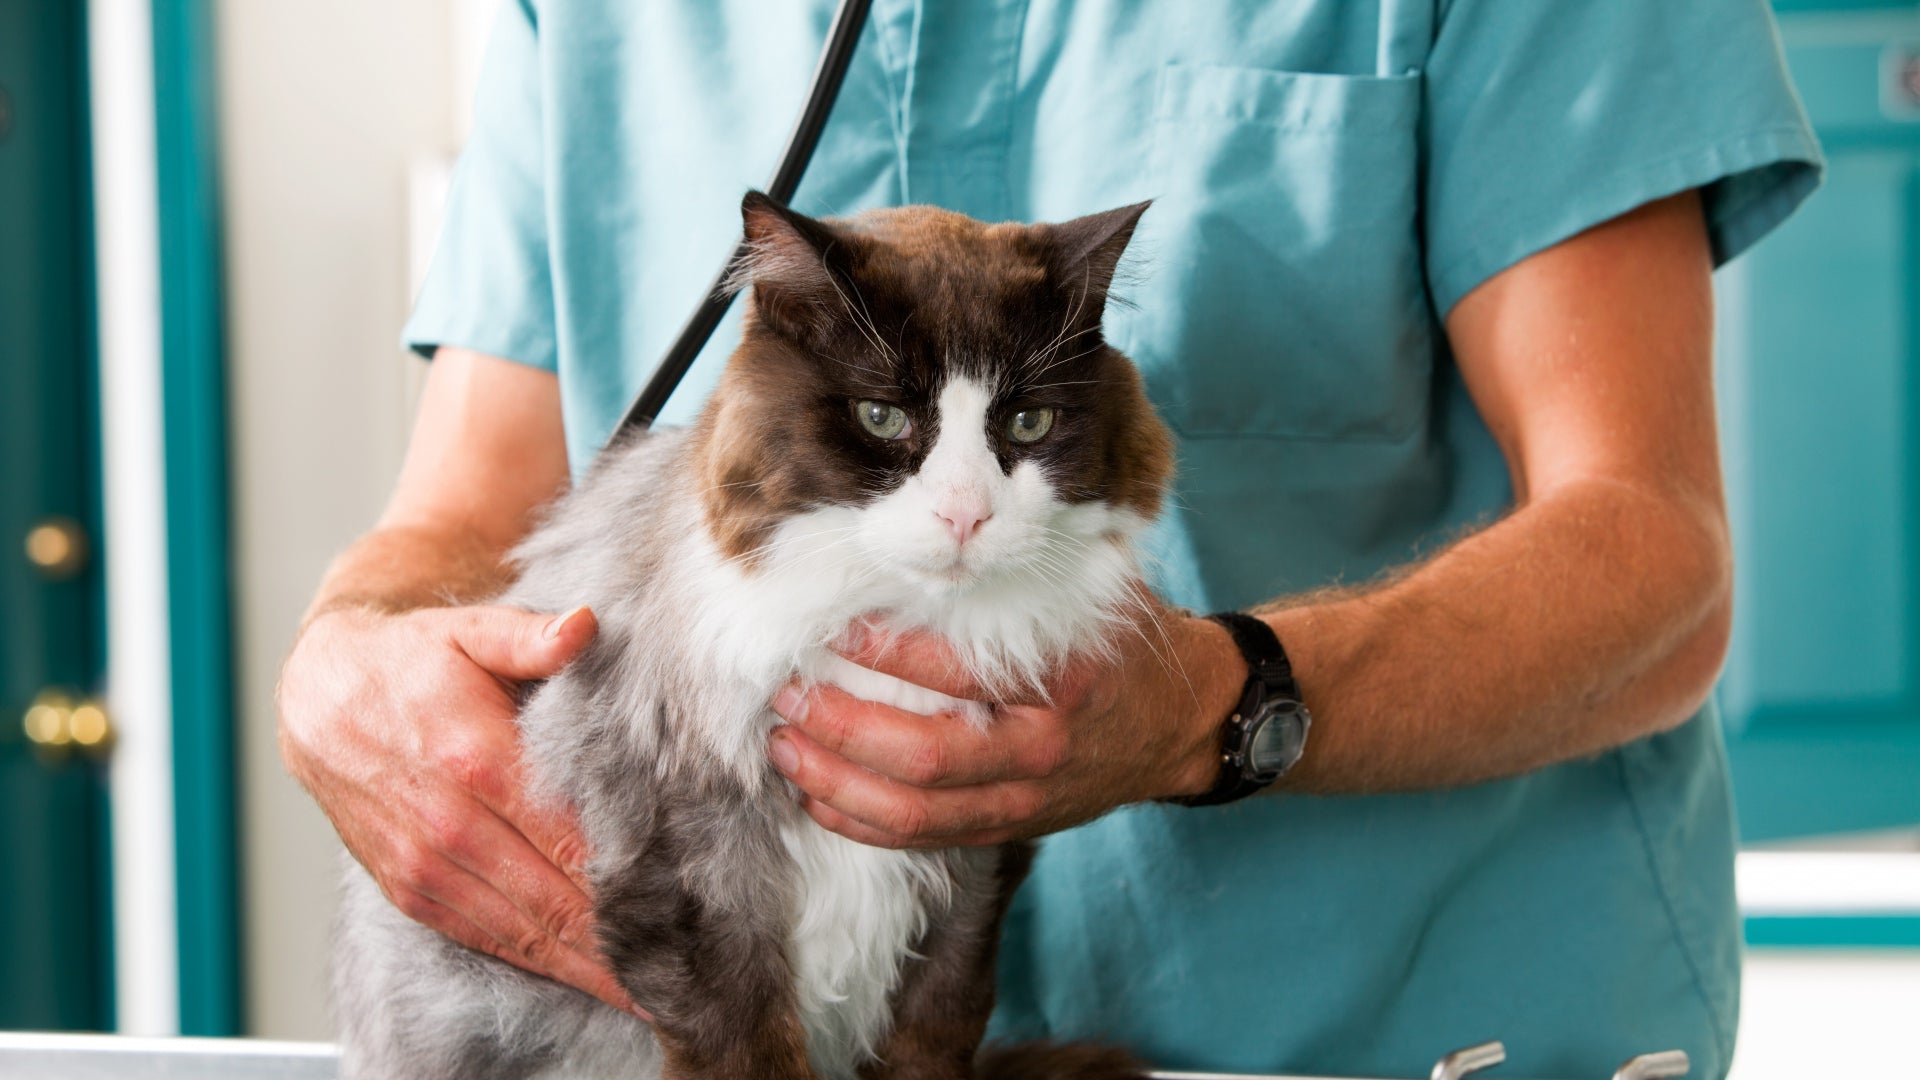 Manage Diabetes in Cats With These 8 Natural Remedies